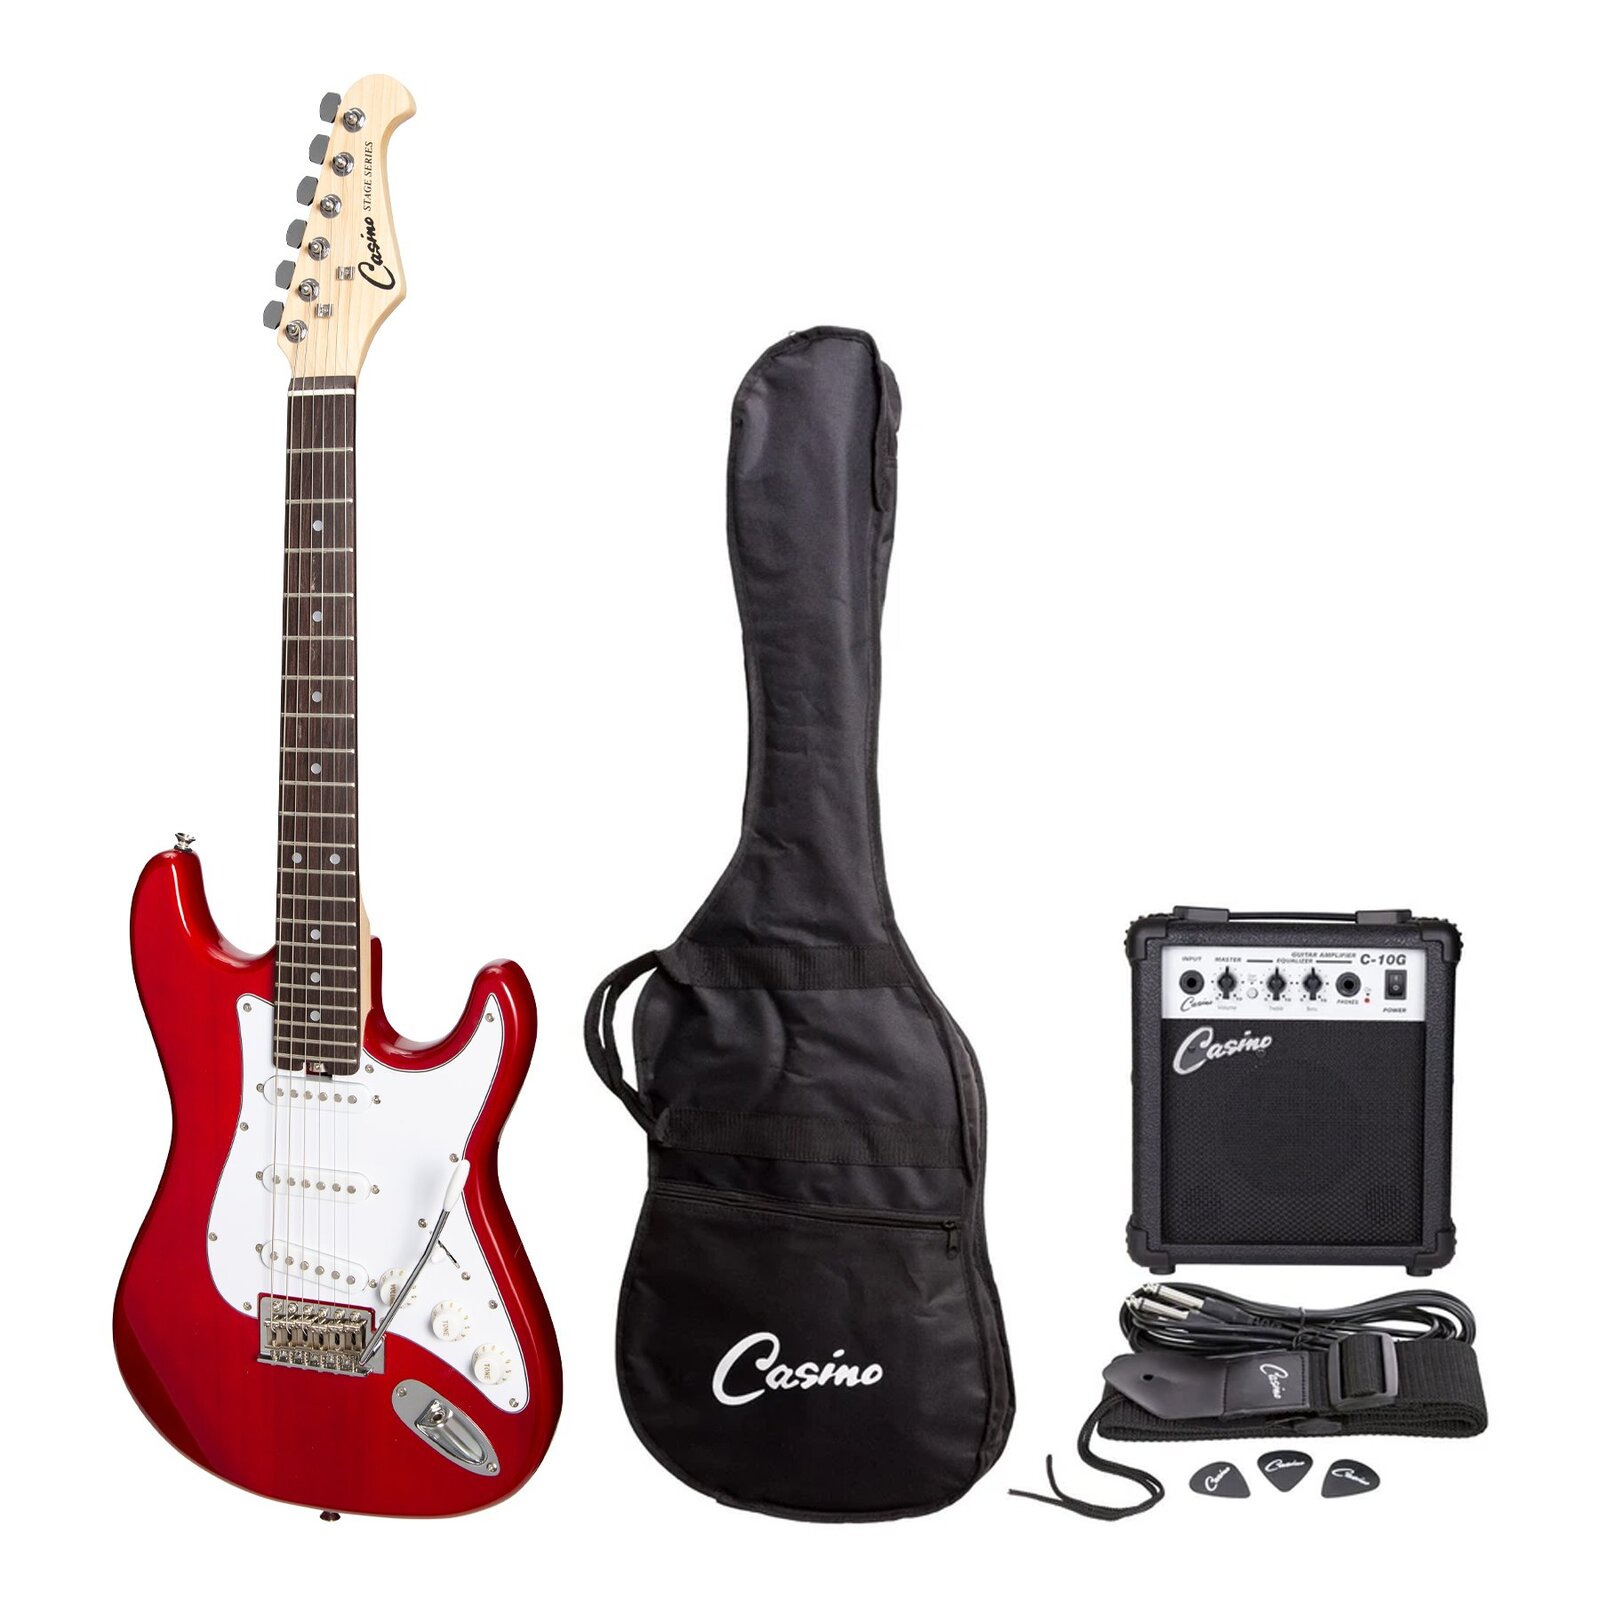 String　a　10　Candy　Pack　CASINO　Apple　Scale　with　in　Short　Strat-Style　Red　Electric　Guitar　Watt　Ampli